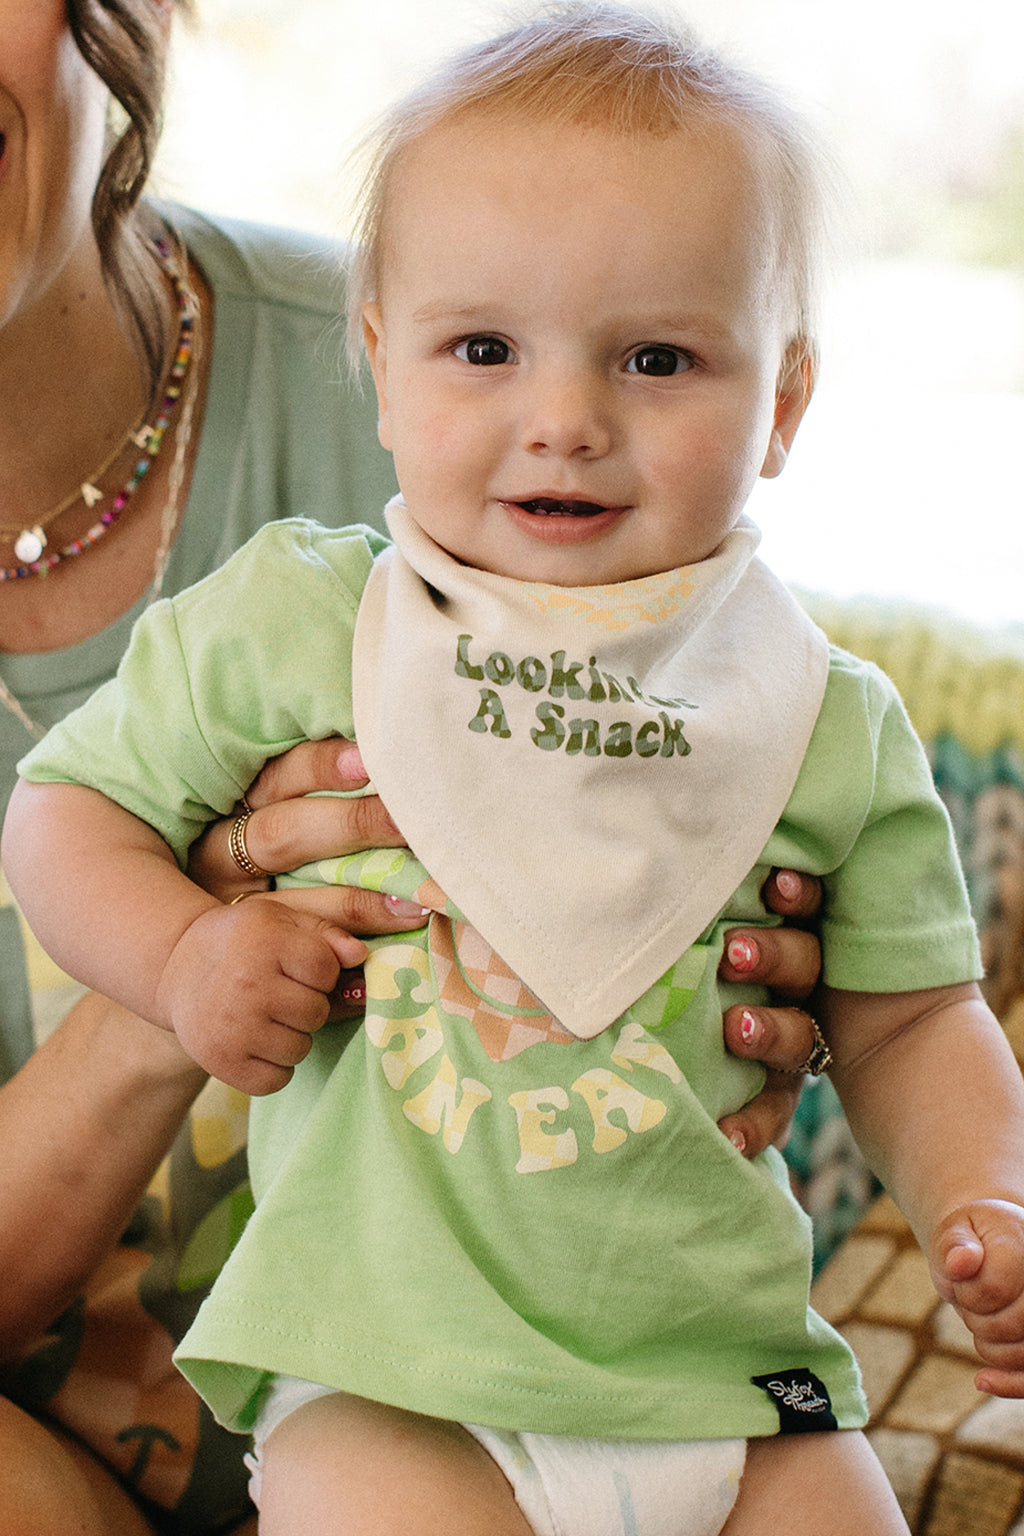 KL+SF Looking for a Snack Bib